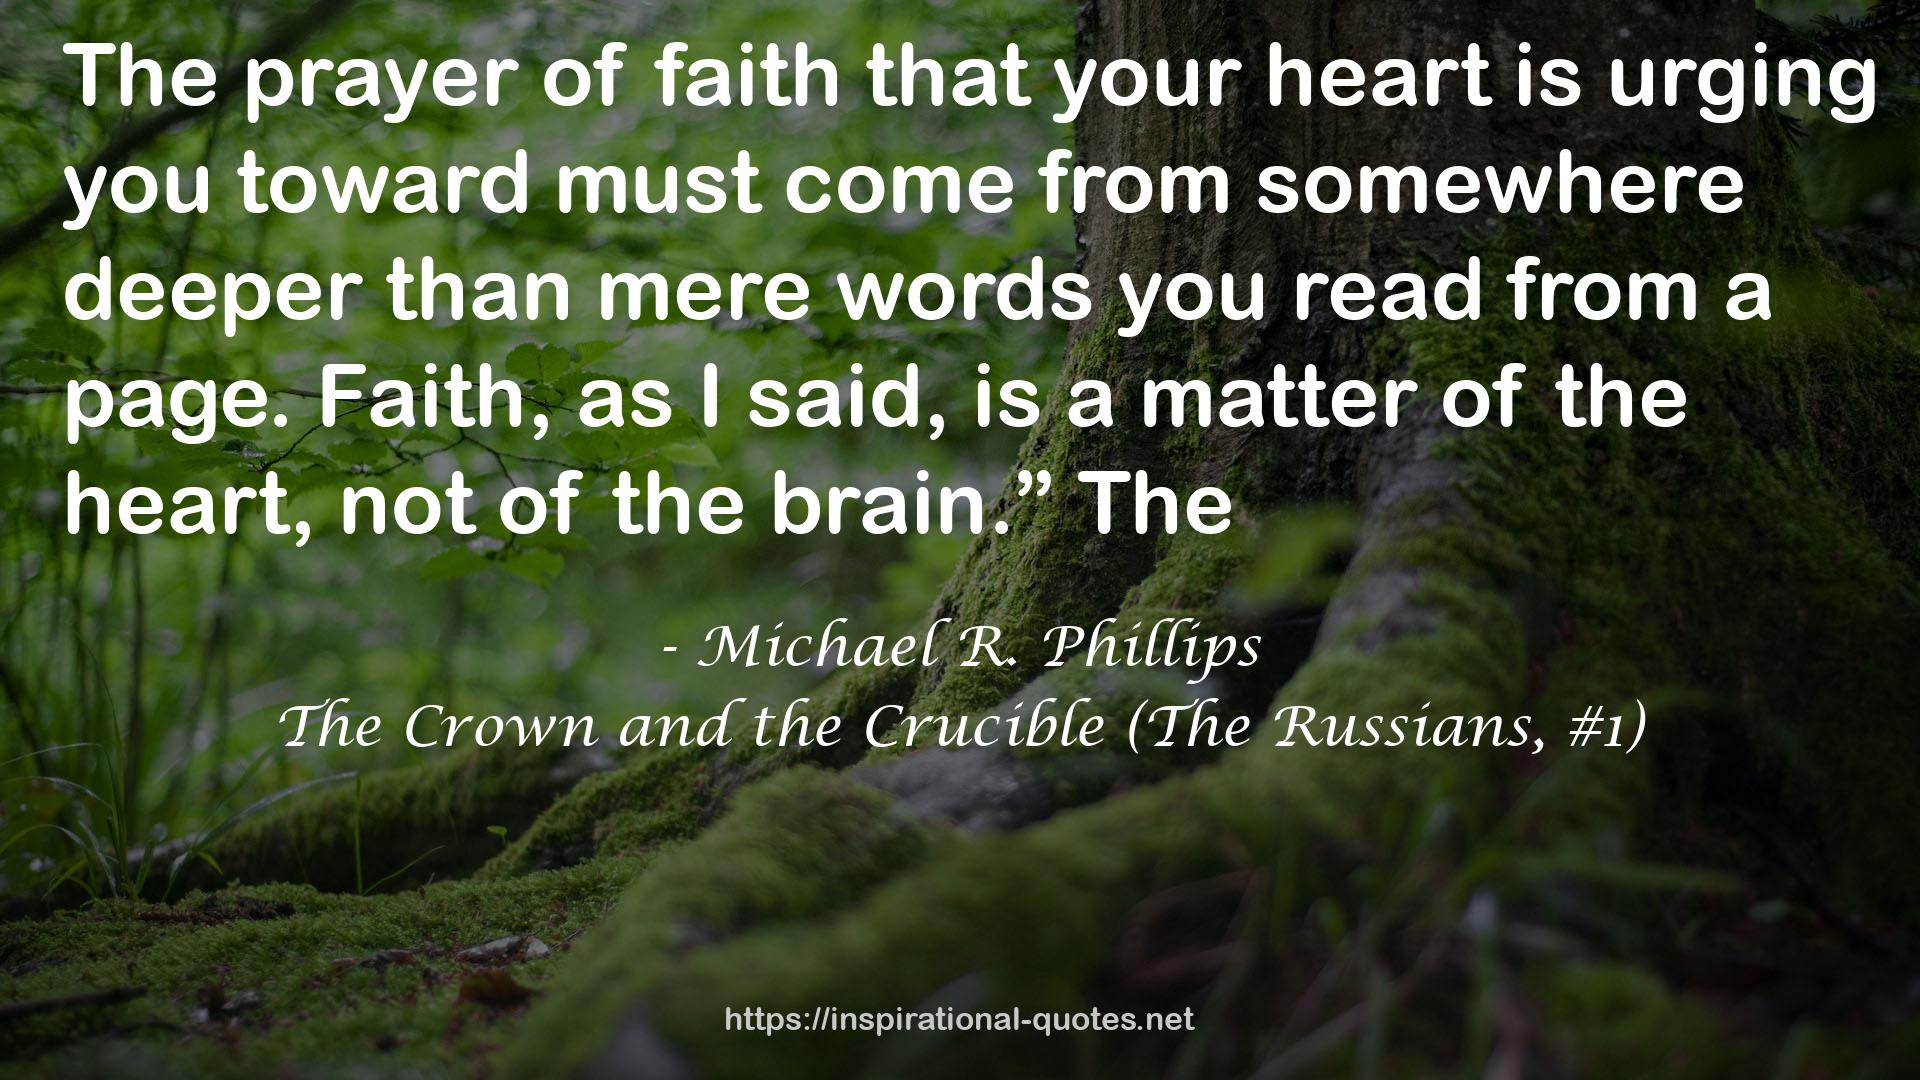 The Crown and the Crucible (The Russians, #1) QUOTES